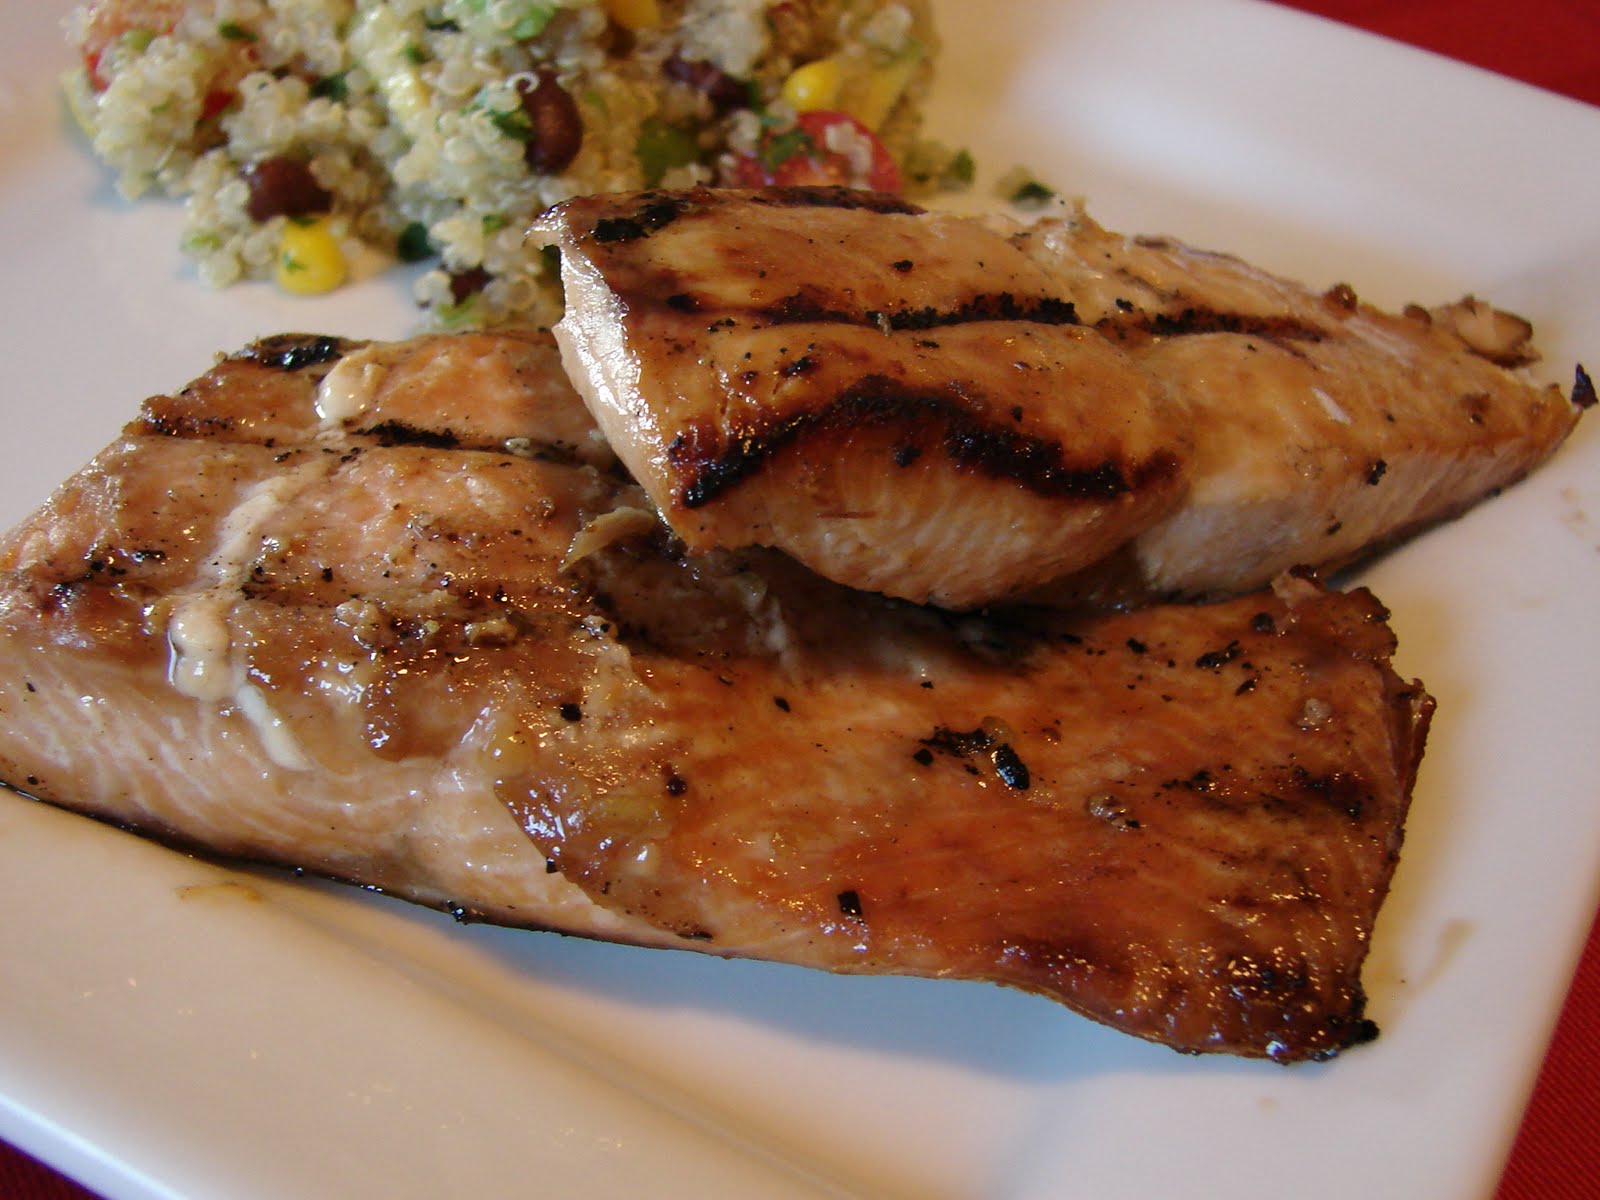 The Royal Cook: Grilled Salmon